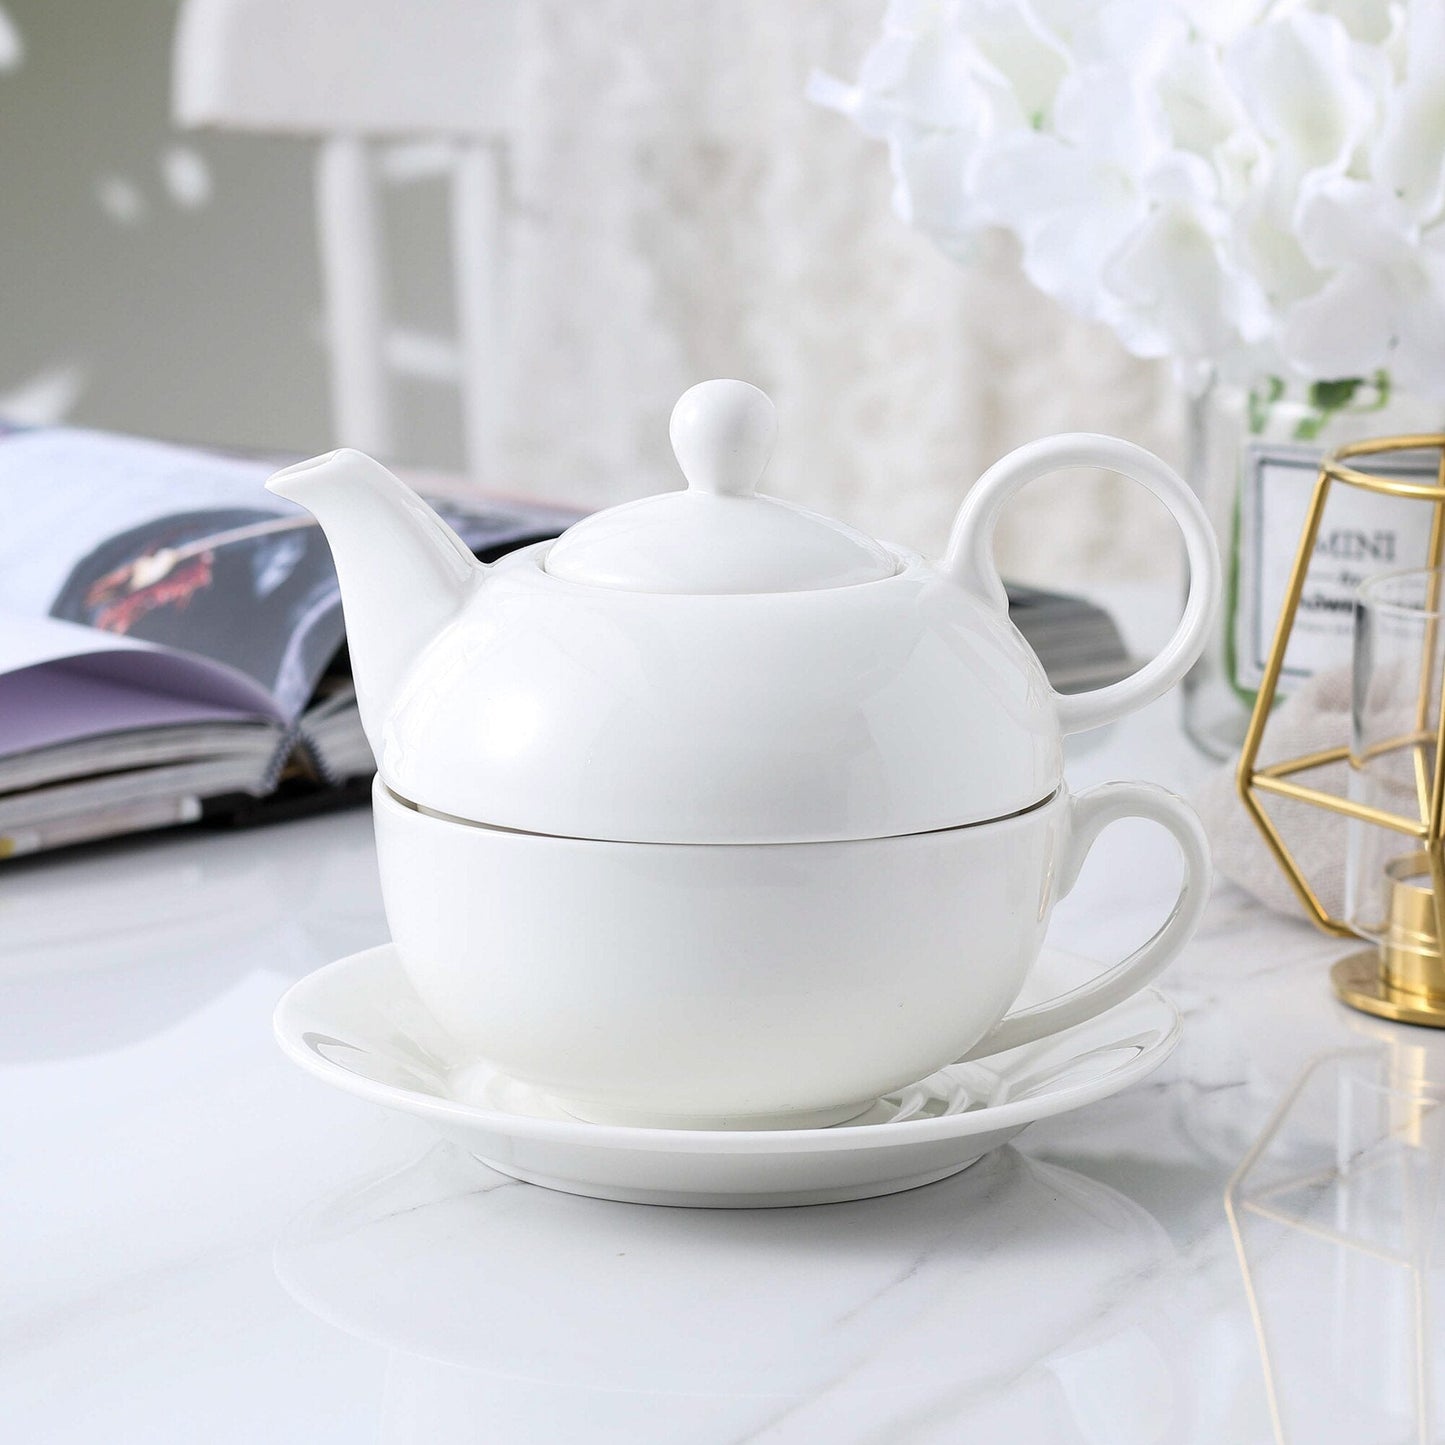 Series Sweet.time 4-Piece Tea for one Set Cream White Porcelain Teapot with the Lid Cup and Saucer - Nordic Side - and, Cream, Cup, for, Lid, one, Piece, Porcelain, Saucer, Series, Set, Sweet